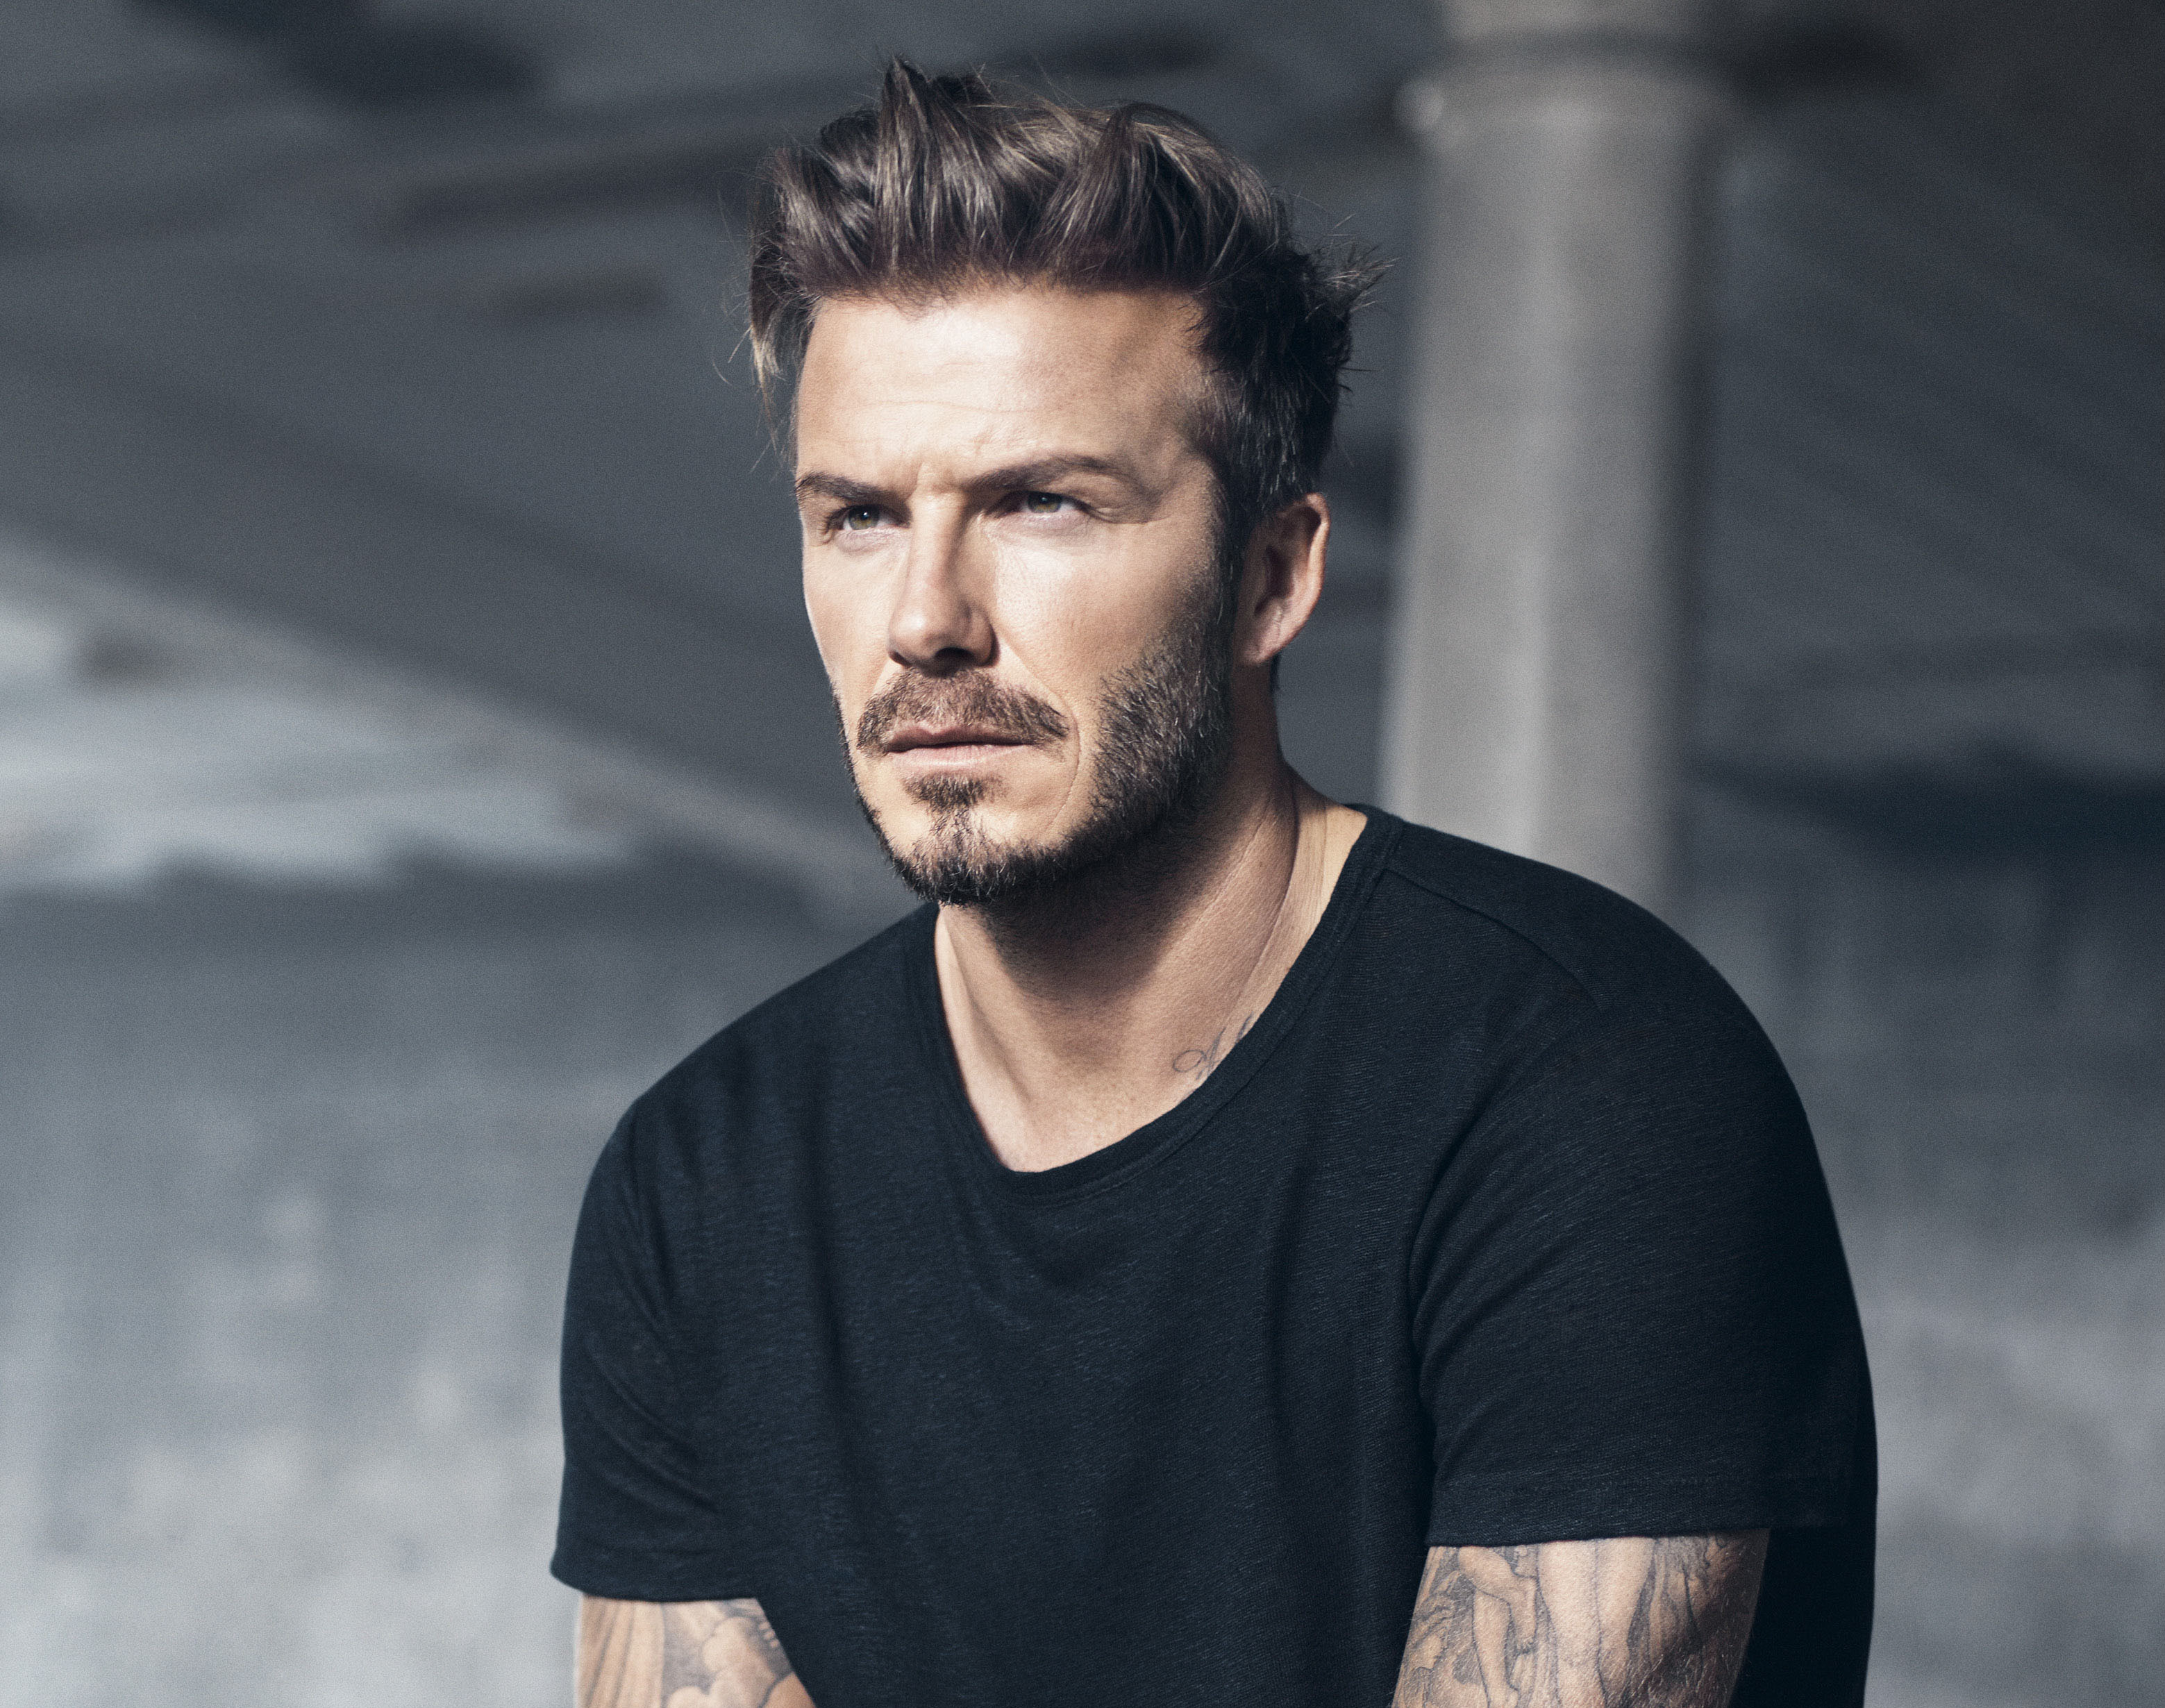 David Beckham 18 Hd Celebrities 4k Wallpapers Images Backgrounds Photos And Pictures